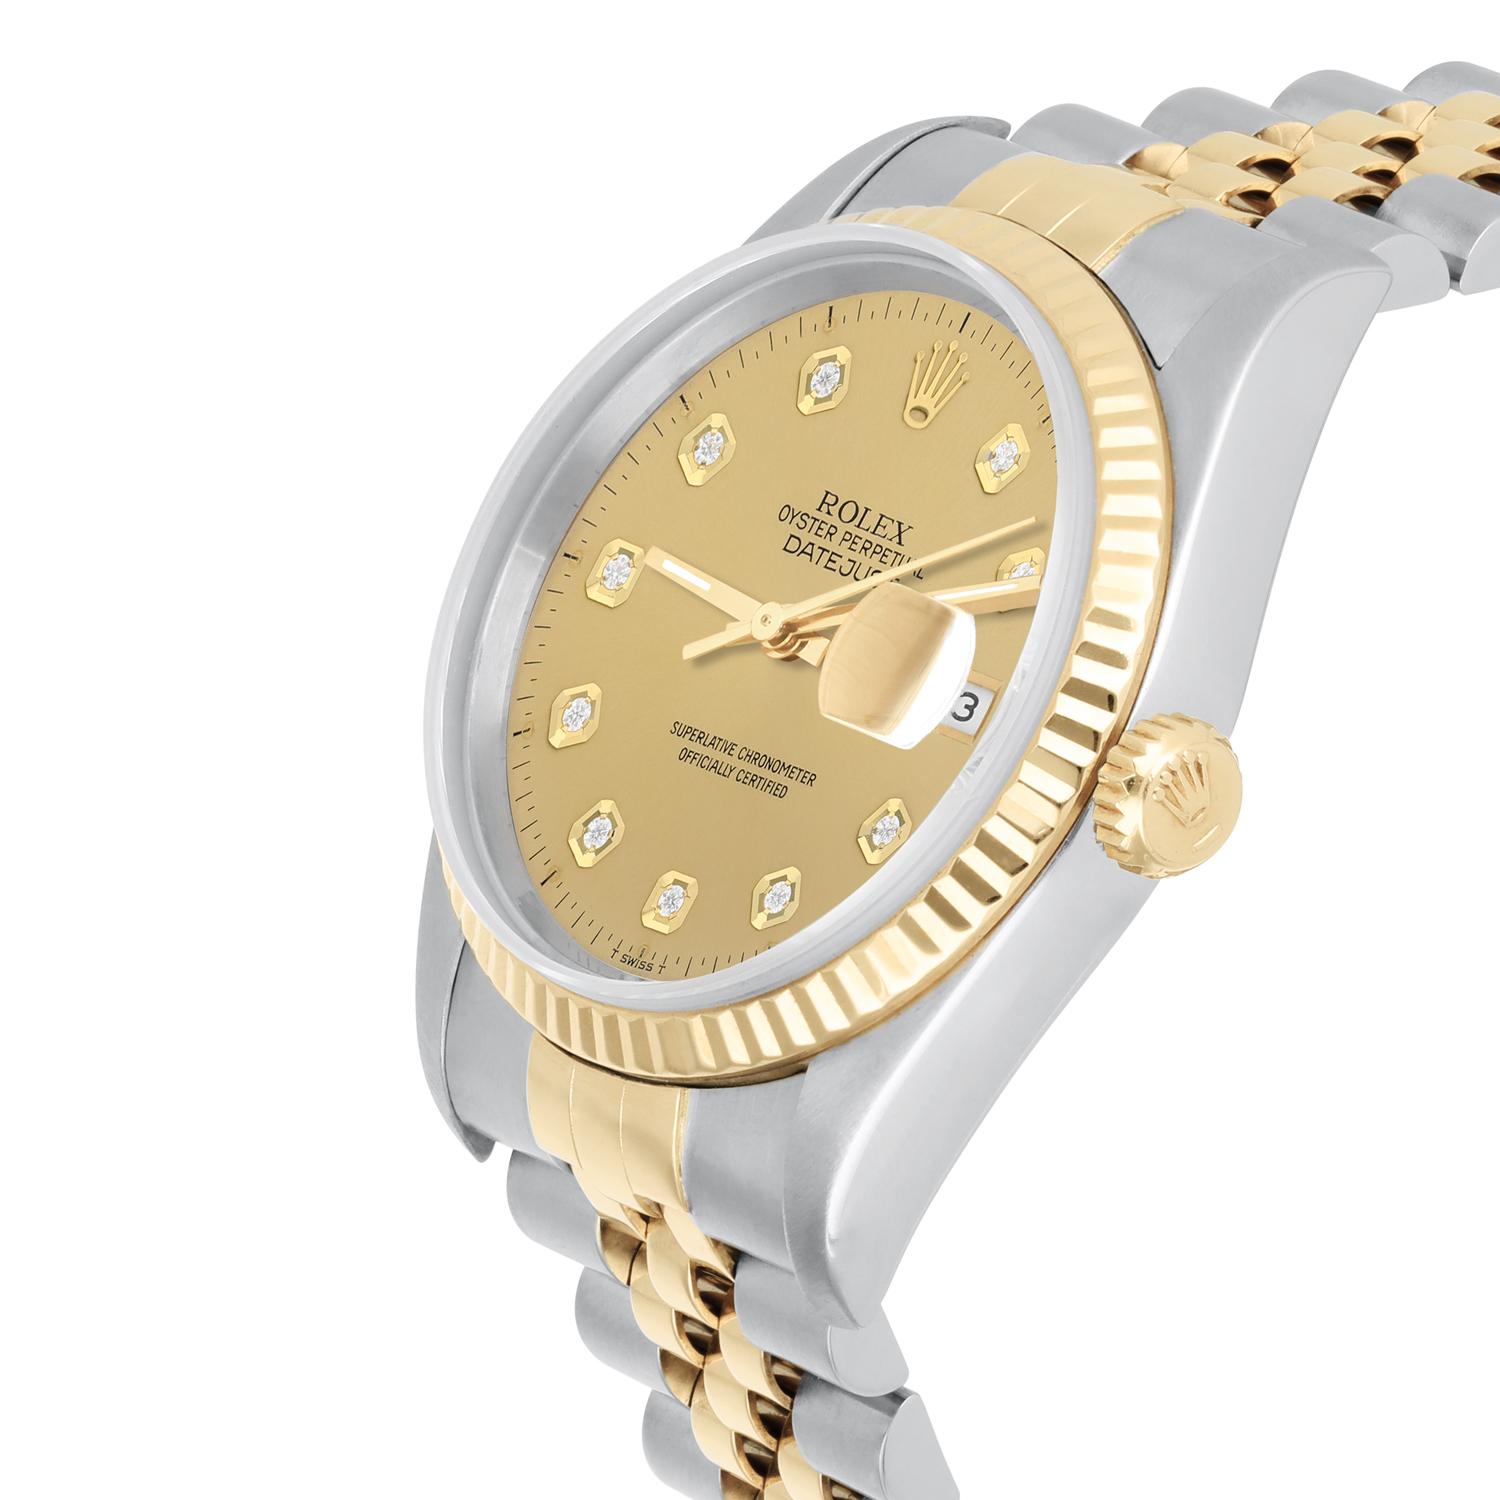 Rolex Datejust 36mm Two Tone Champagne Diamond Dial Jubilee 16233 Circa 1995 In Excellent Condition For Sale In New York, NY